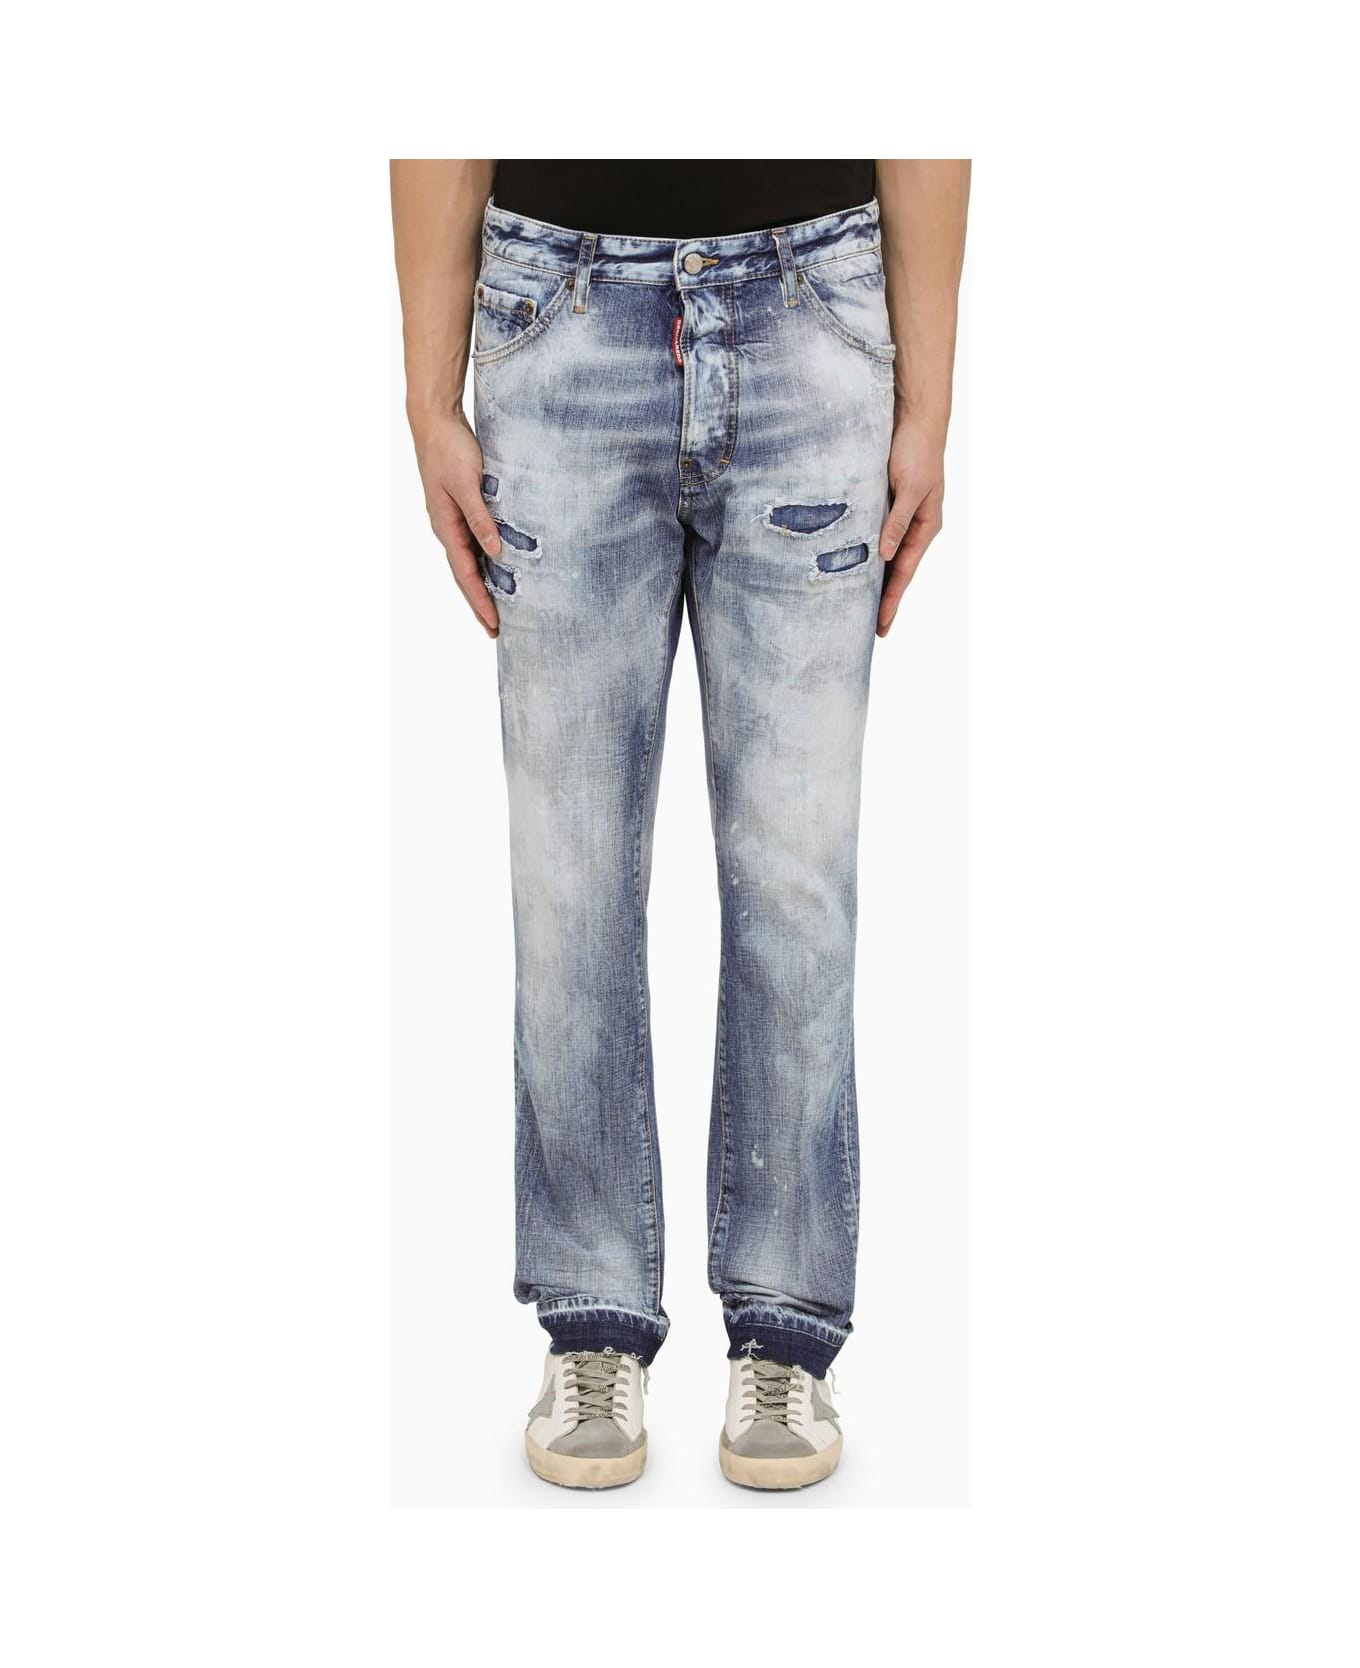 Dsquared2 Navy Blue Washed Jeans With Denim Wear - Blue